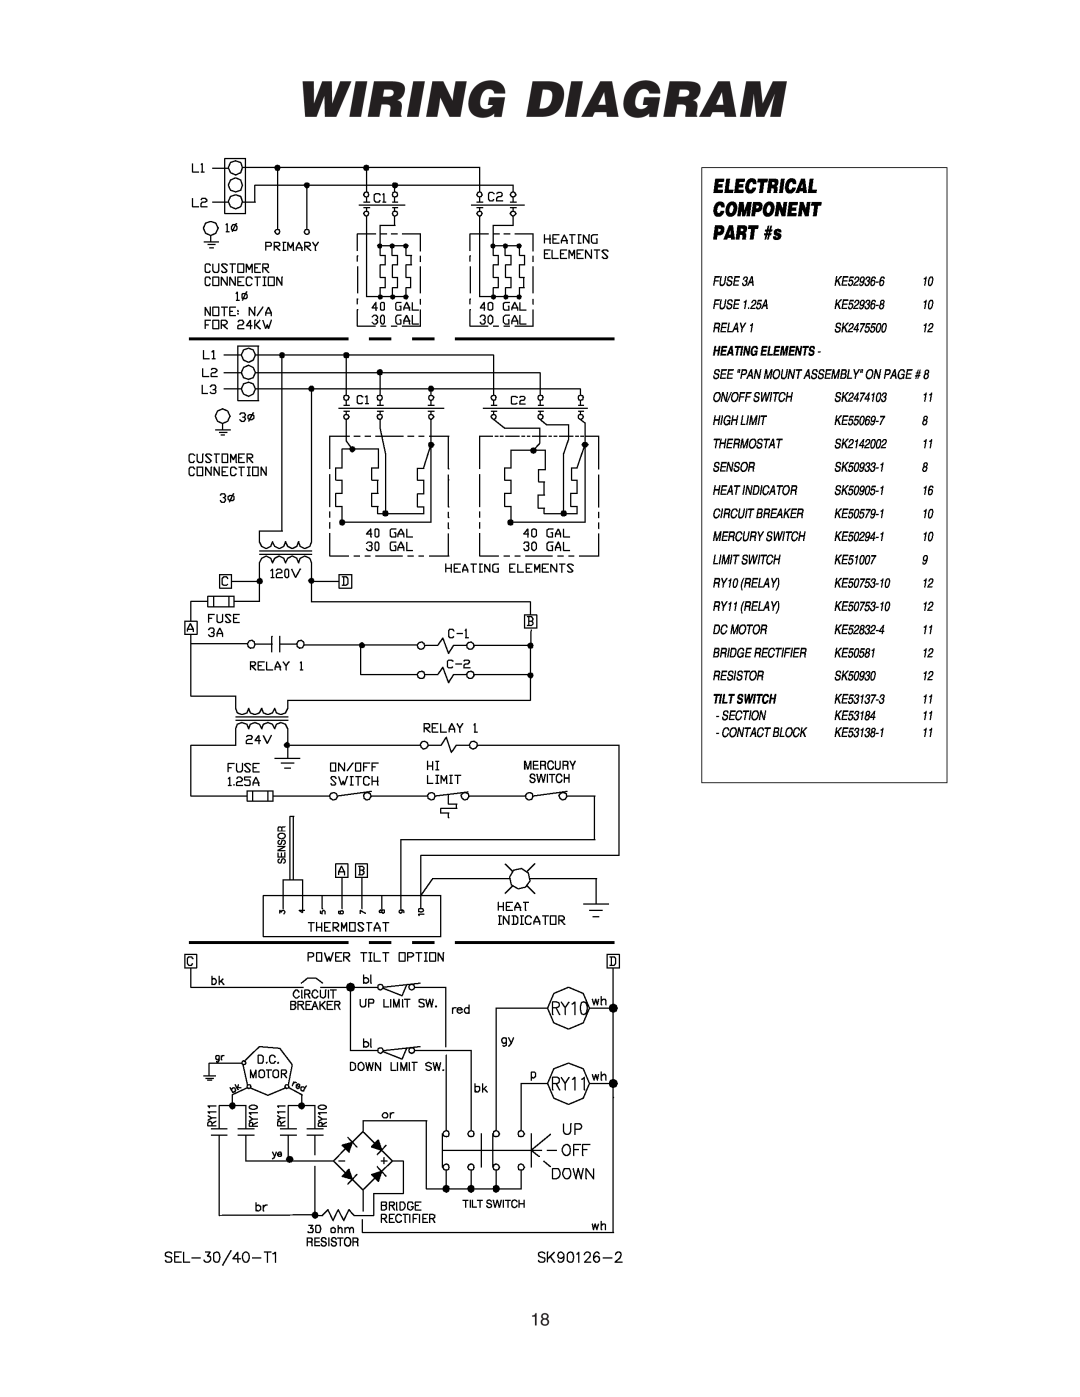 Cleveland Range SEL-40-T1, SEL-30-T1 manual Wiring Diagram, PART #s, Electrical, Component, Tilt Switch 